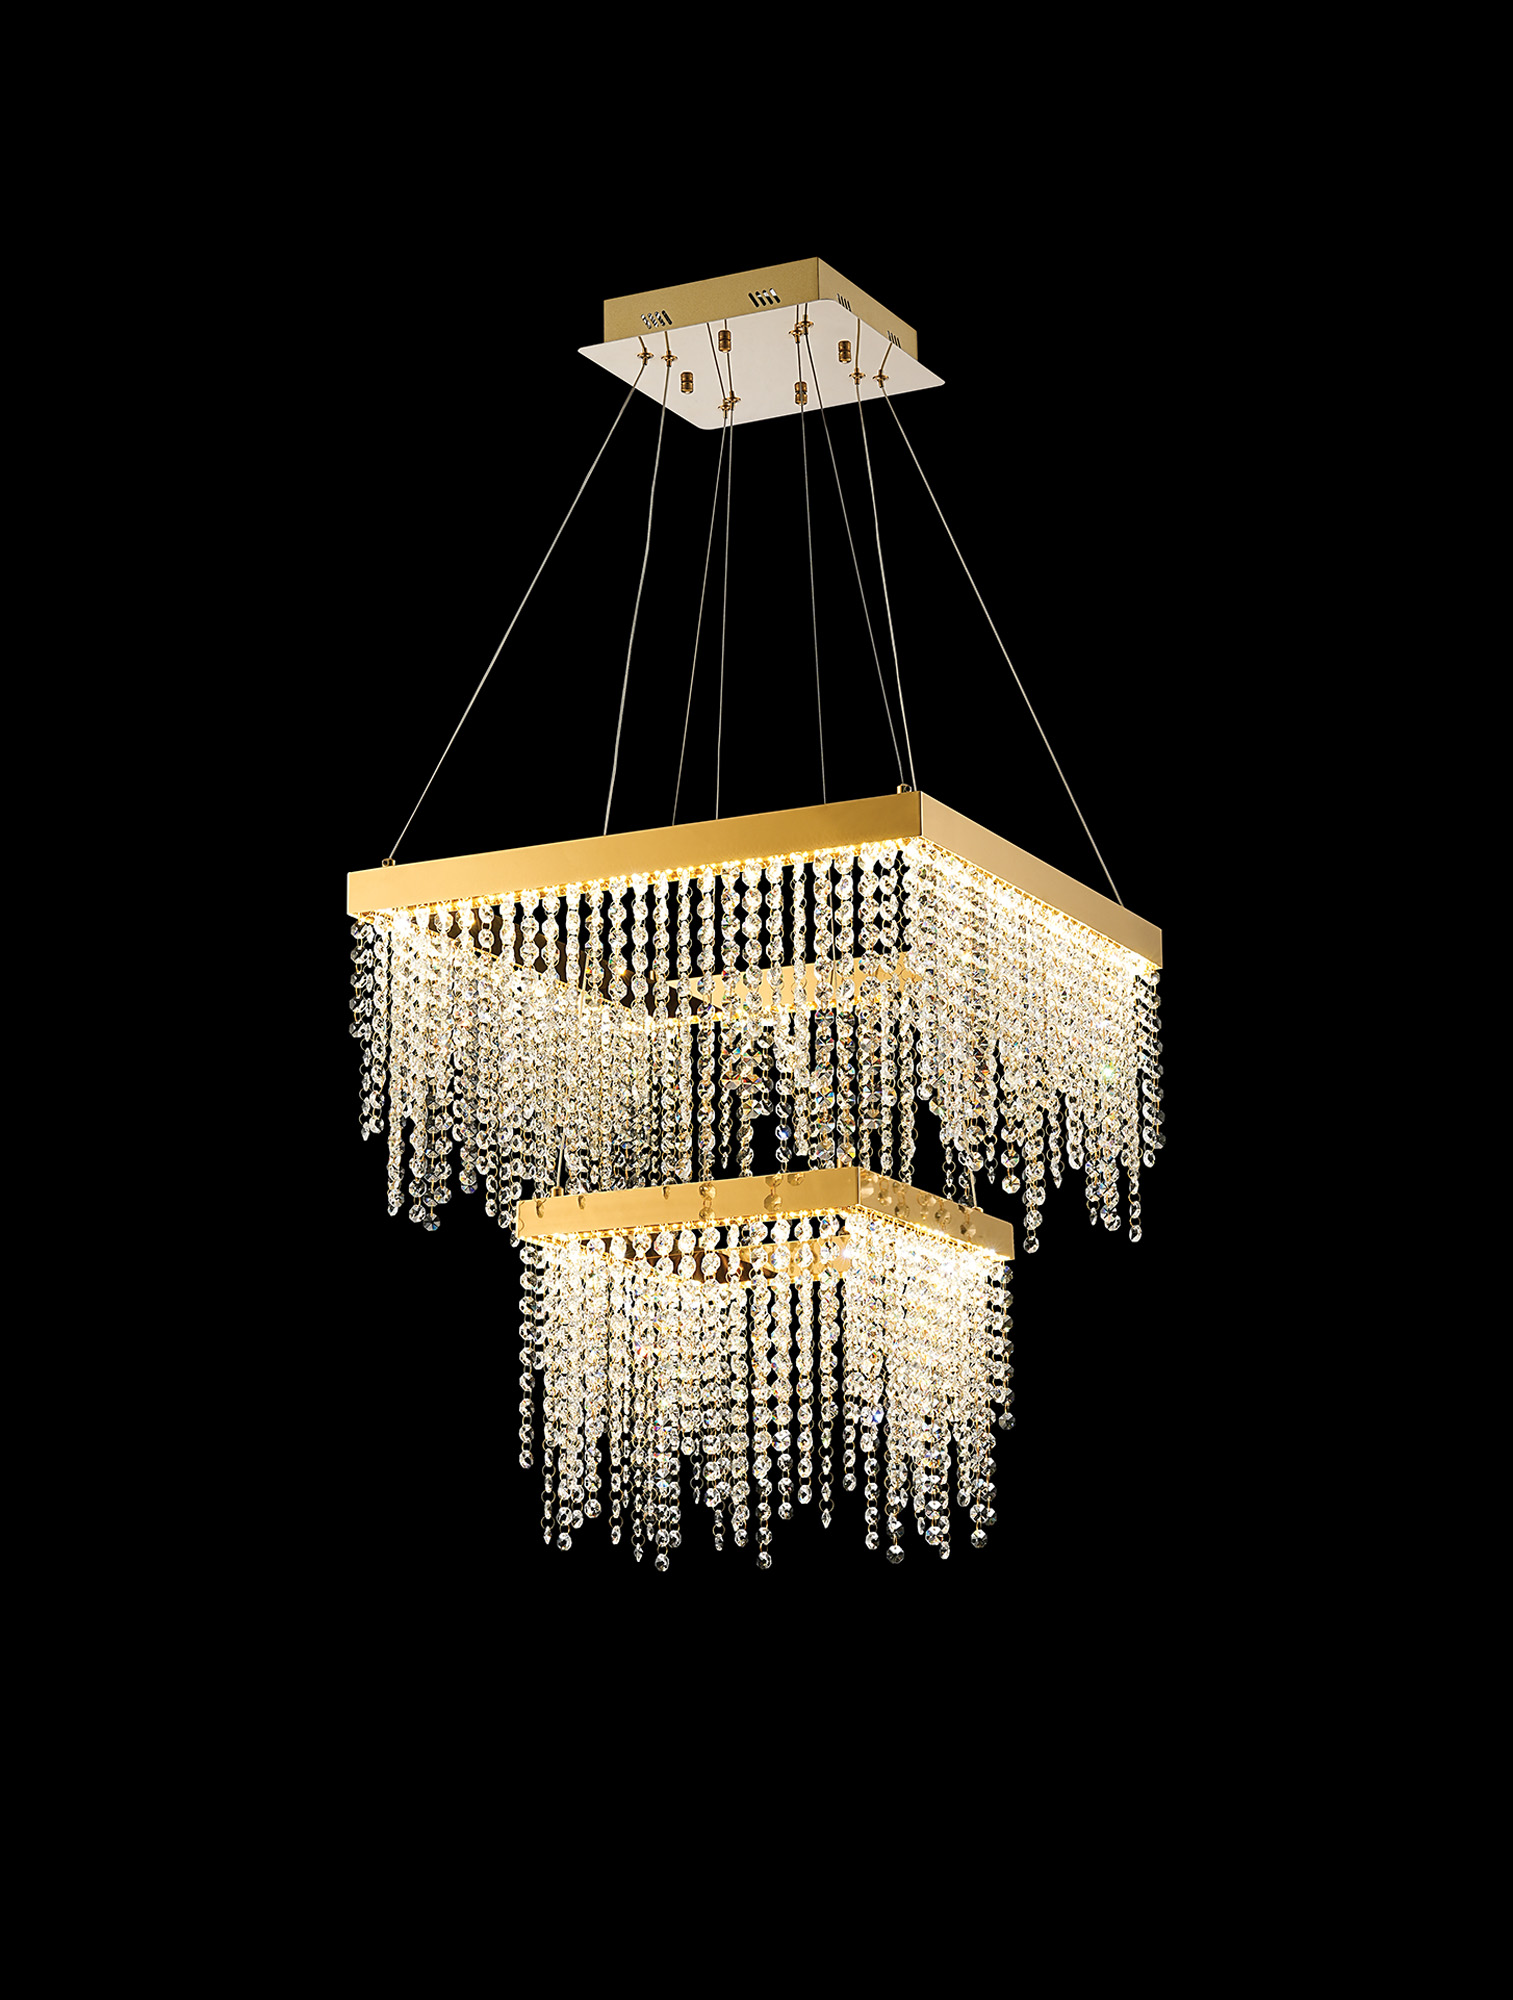 Bano French Gold Crystal Ceiling Lights Diyas Tiered Crystal Fittings